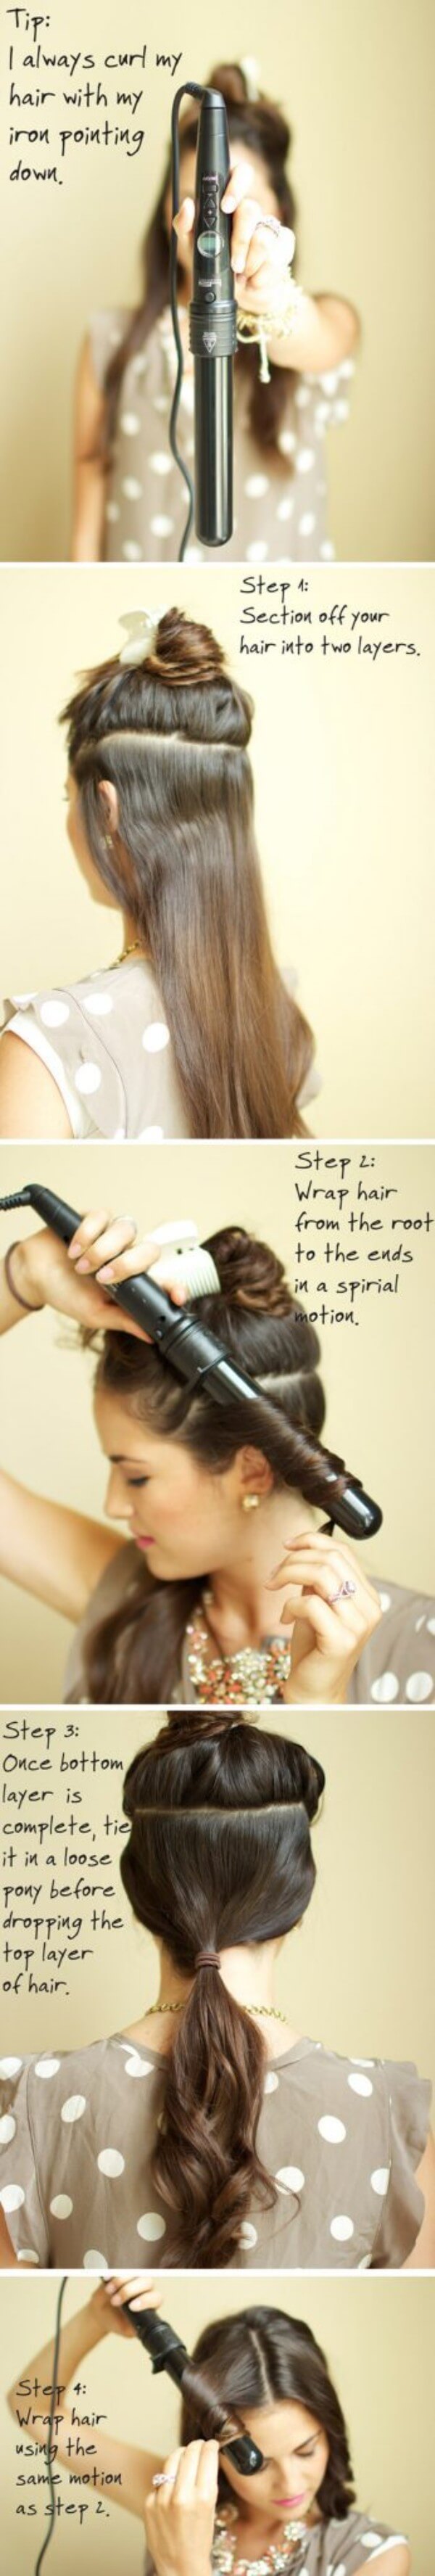 No-Heat Way To Curl Your Hair Ways to Curl Your Hairs: Step by Step Guide